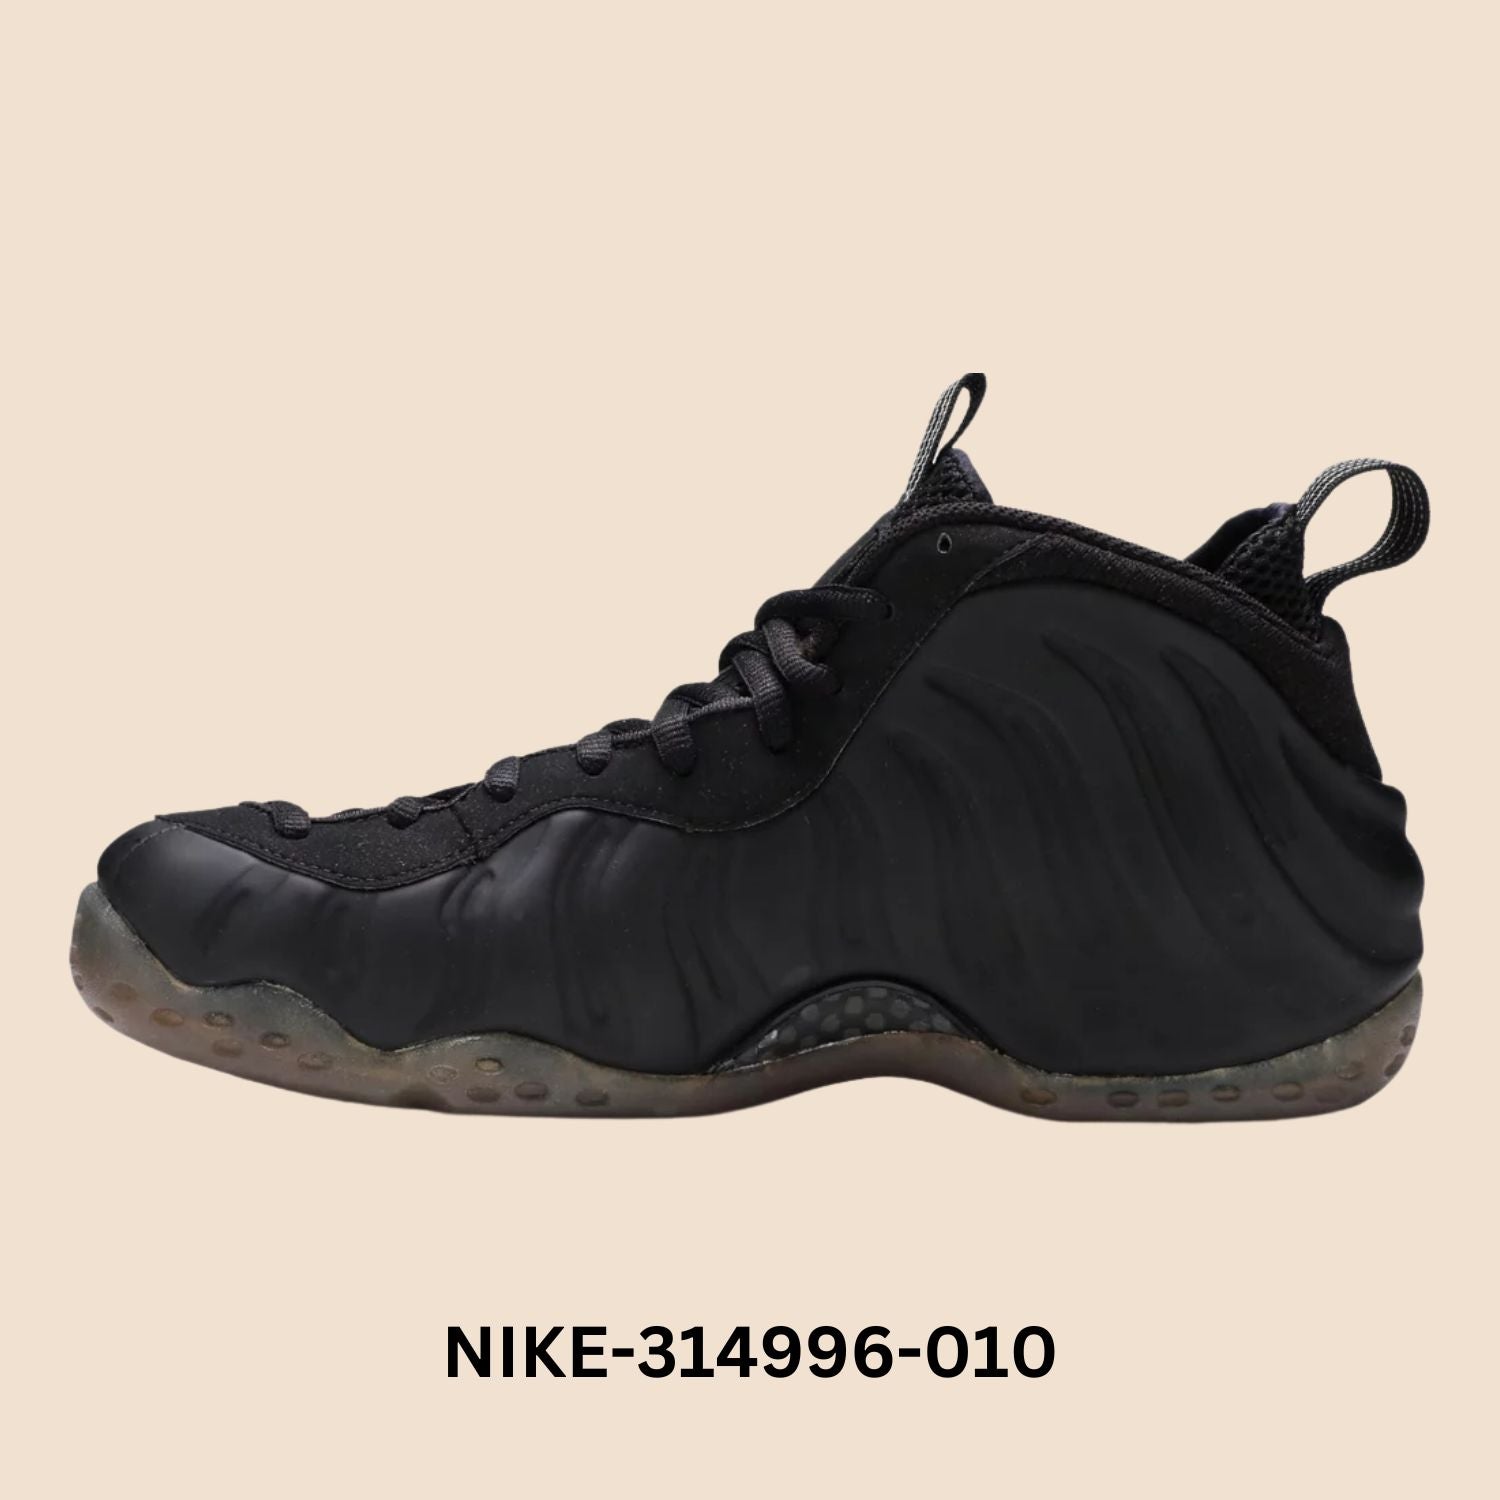 Nike Air Foamposite One "Stealth" Men's Style# 314996-010